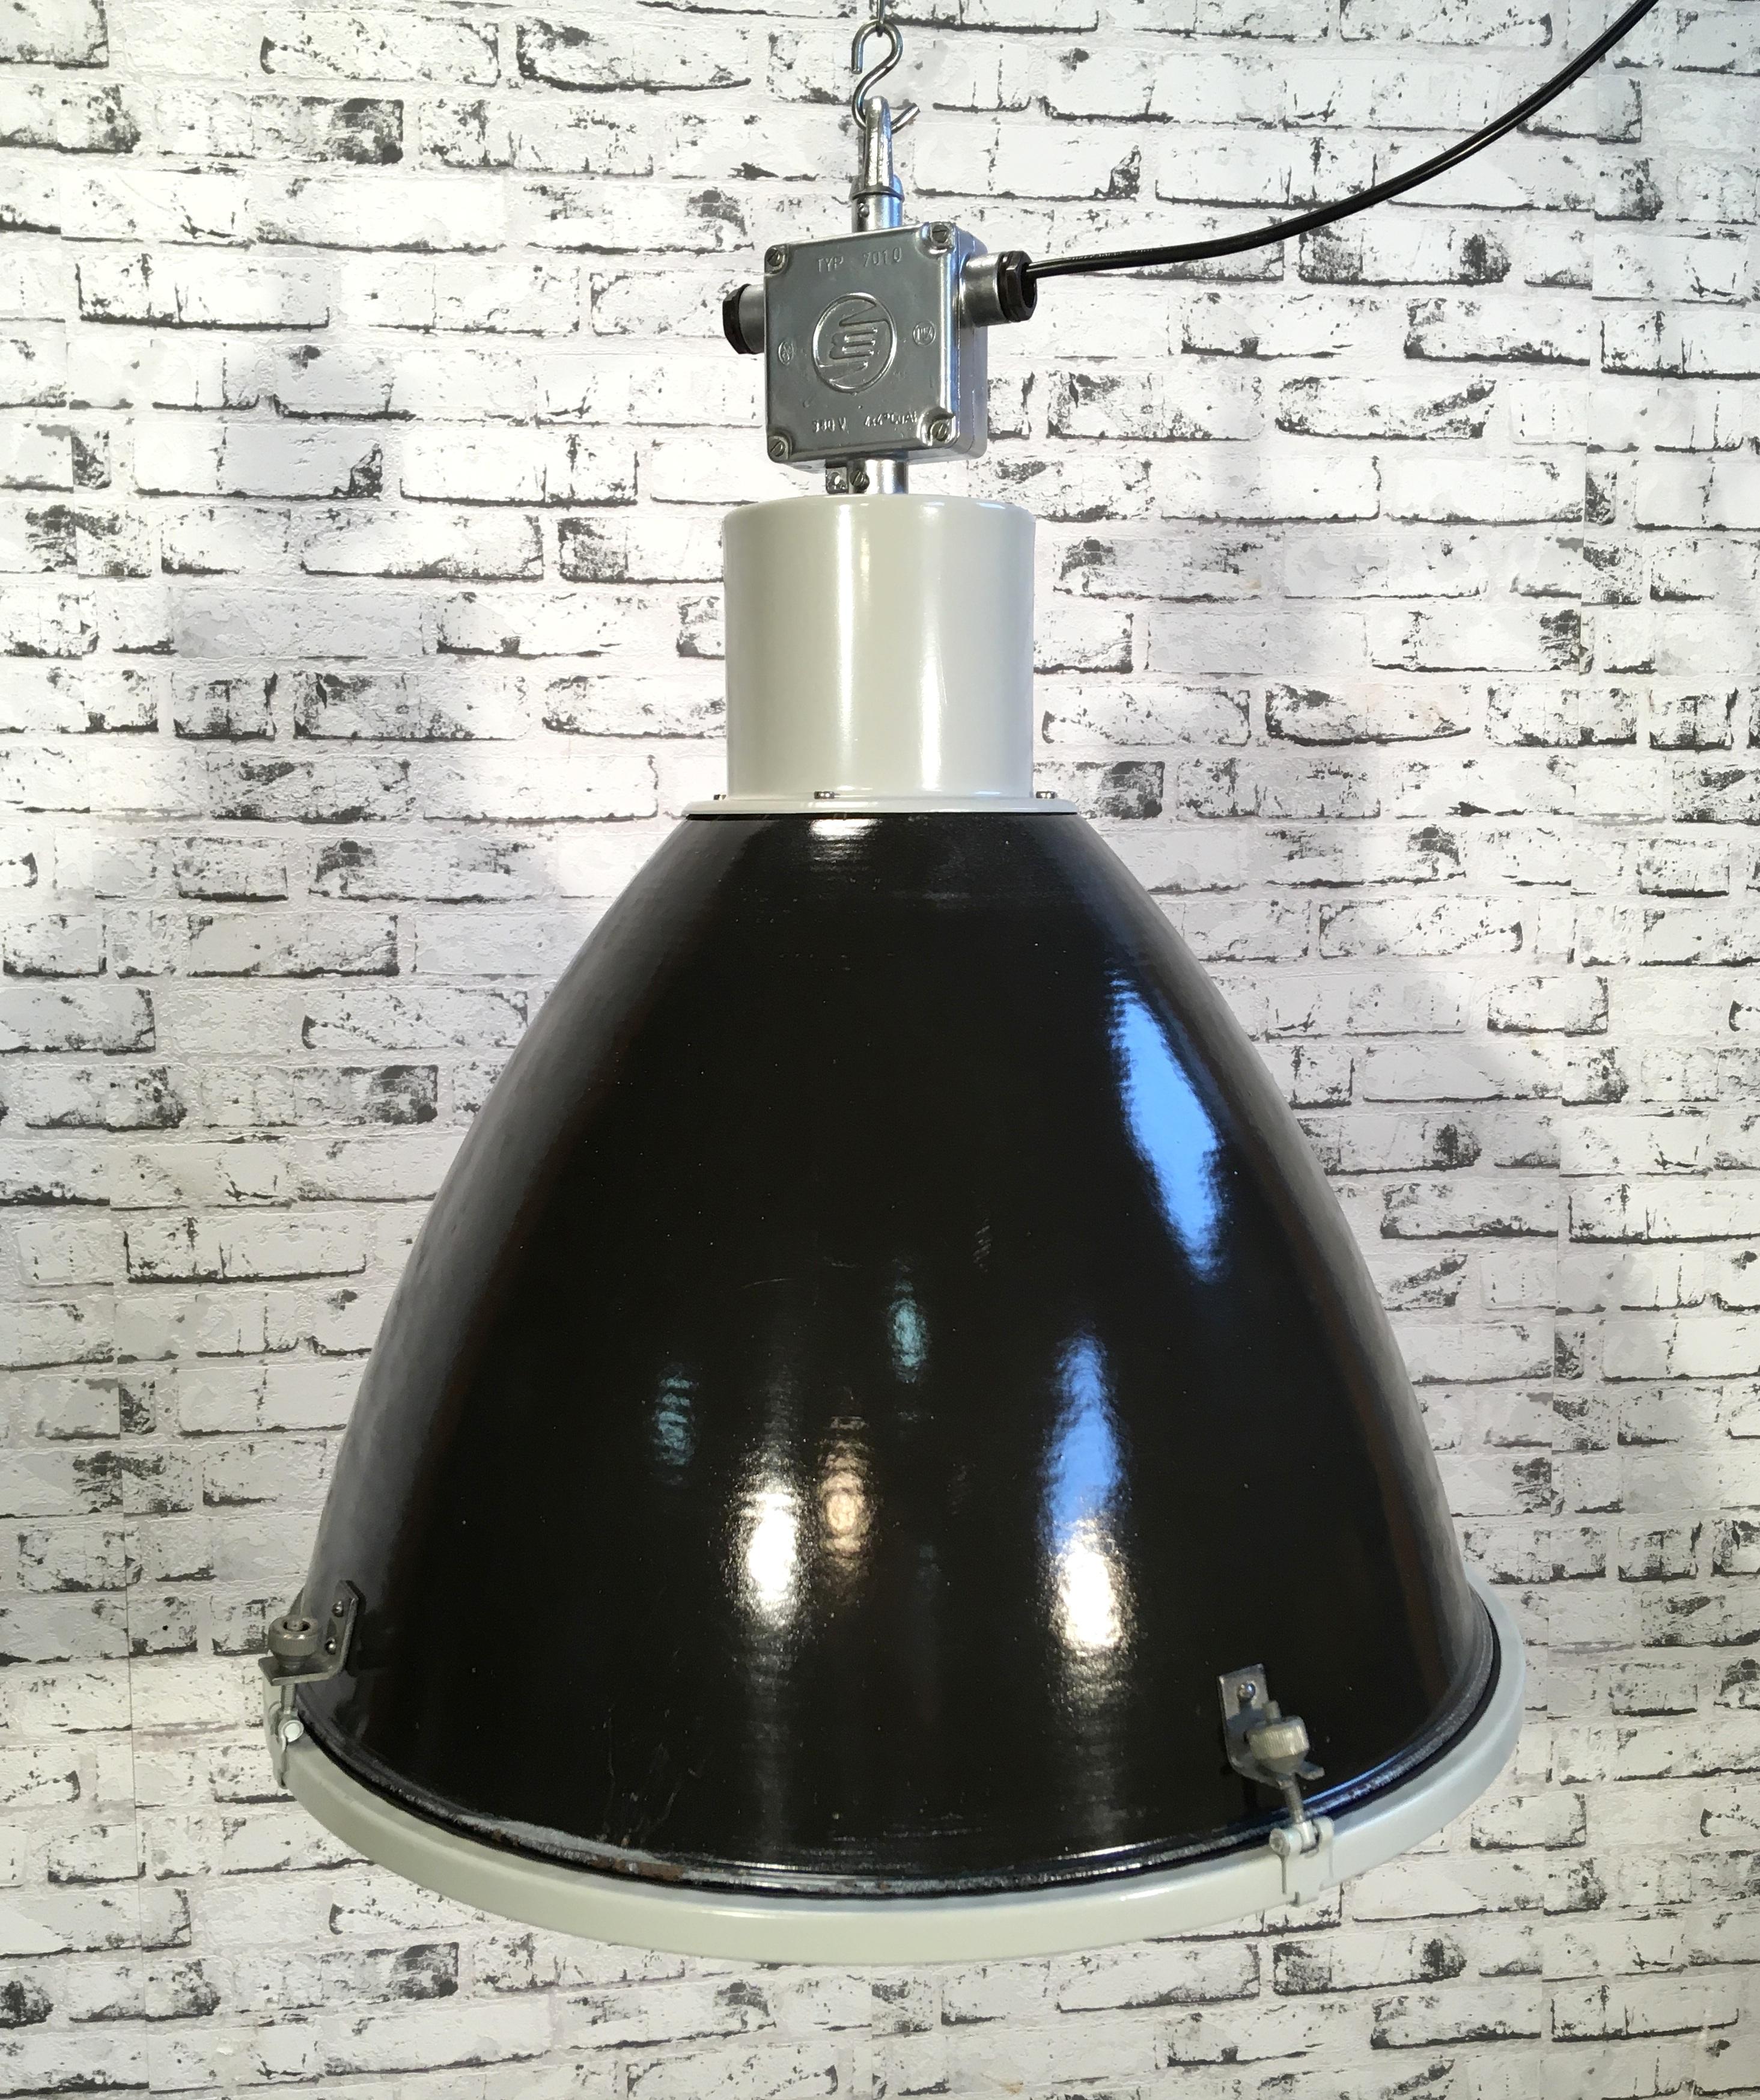 This steel black enamel pendant lamp was designed in the 1960s and produced by Elektrosvit in the former Czechoslovakia. It features a grey metal top with cast aluminium box, black enamel shade, white enamel interior, and clear glass cover.
Lamp is